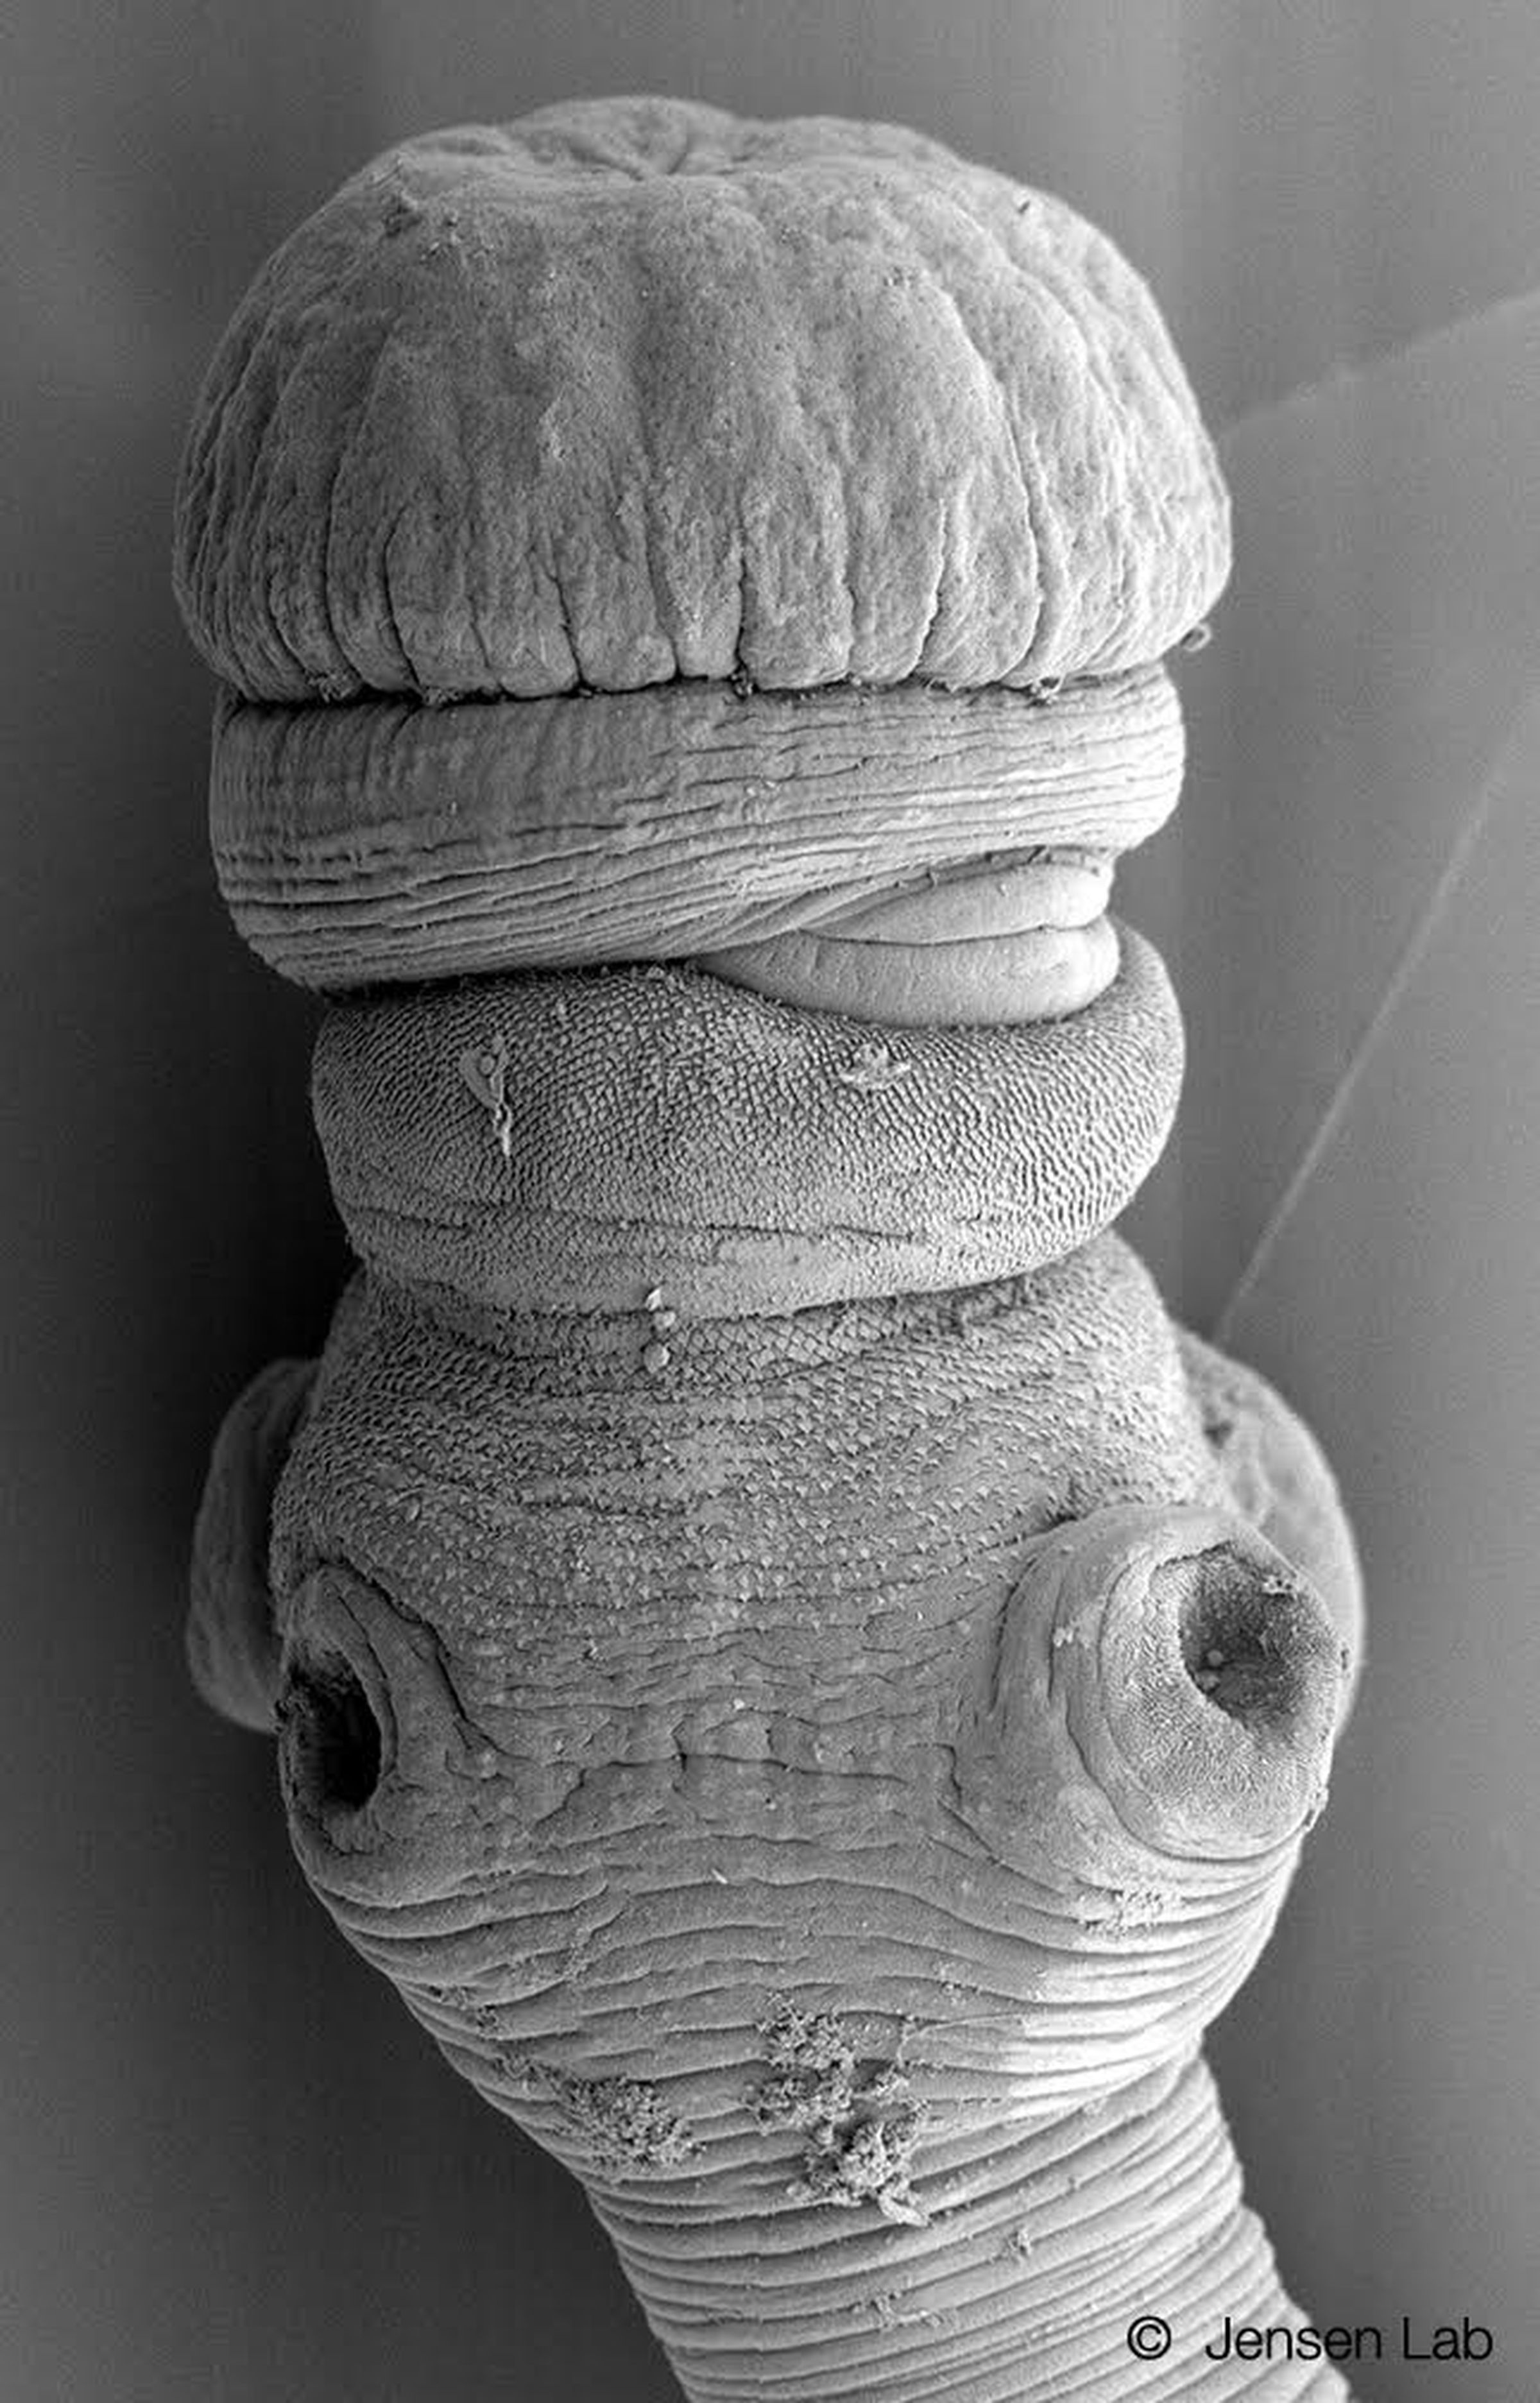 Seussapex karybares, parasitologist Kirsten Jensen’s favorite species of tapeworm, is named for its resemblance to the Cat in the Hat.